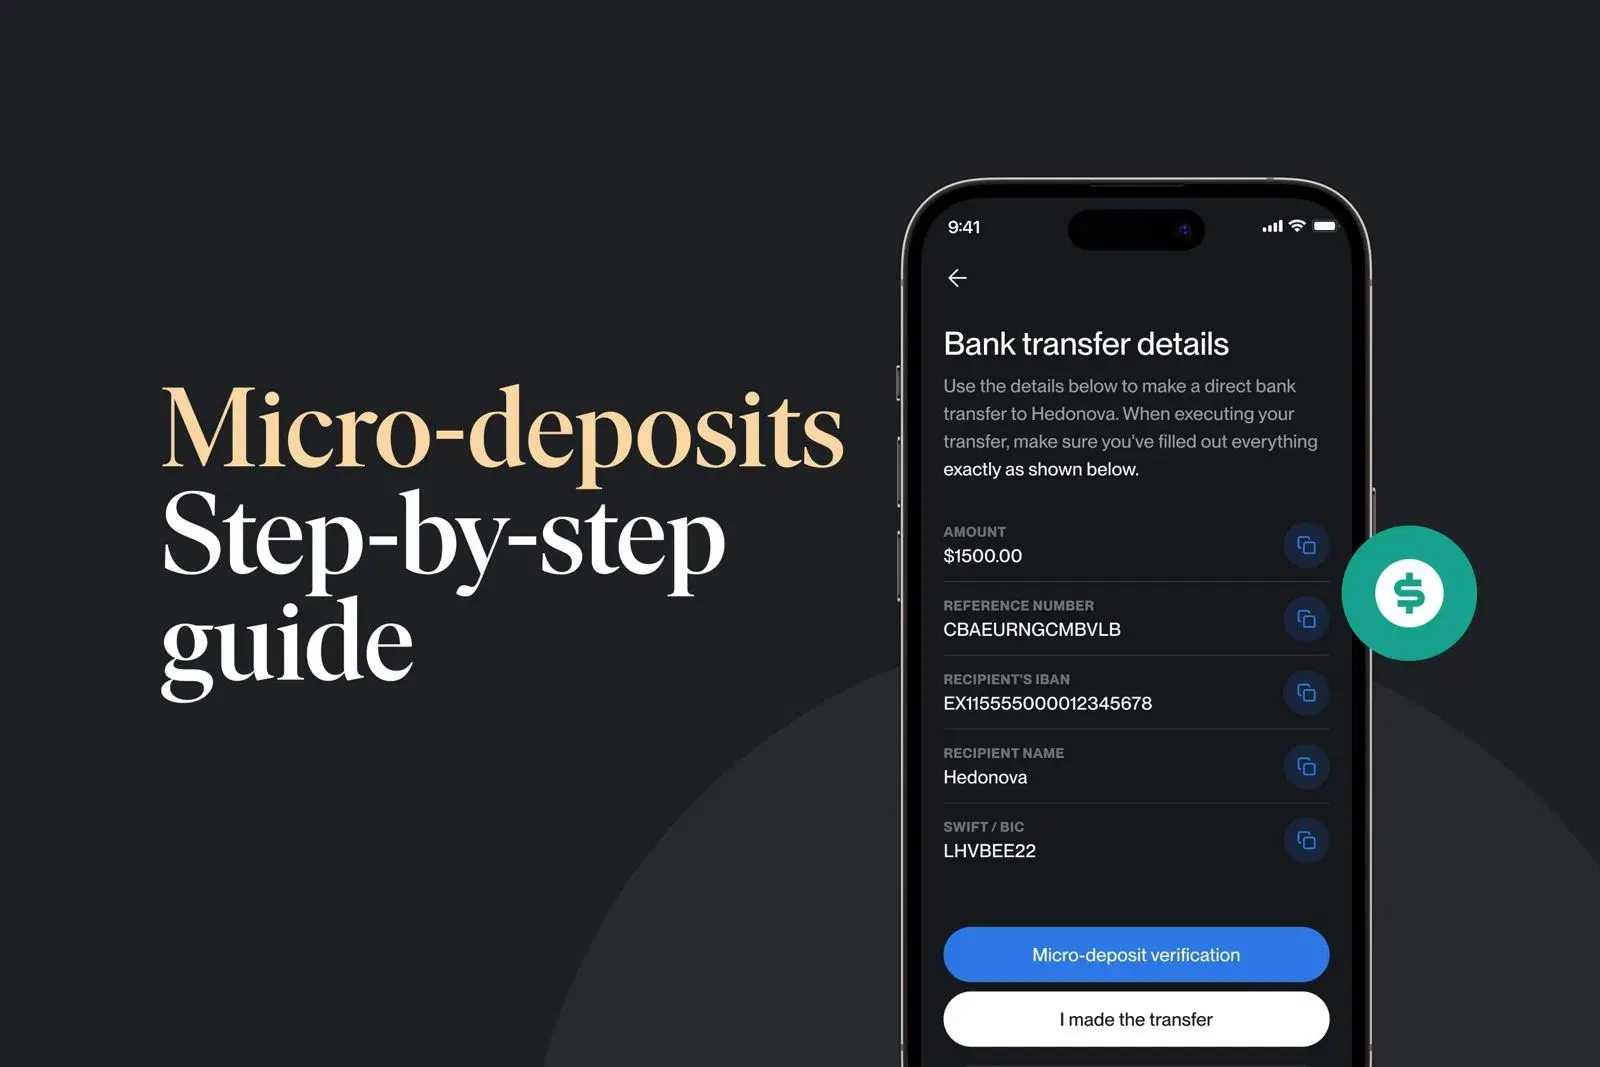 Step-by-step guide to completing direct bank transfers with micro-deposits